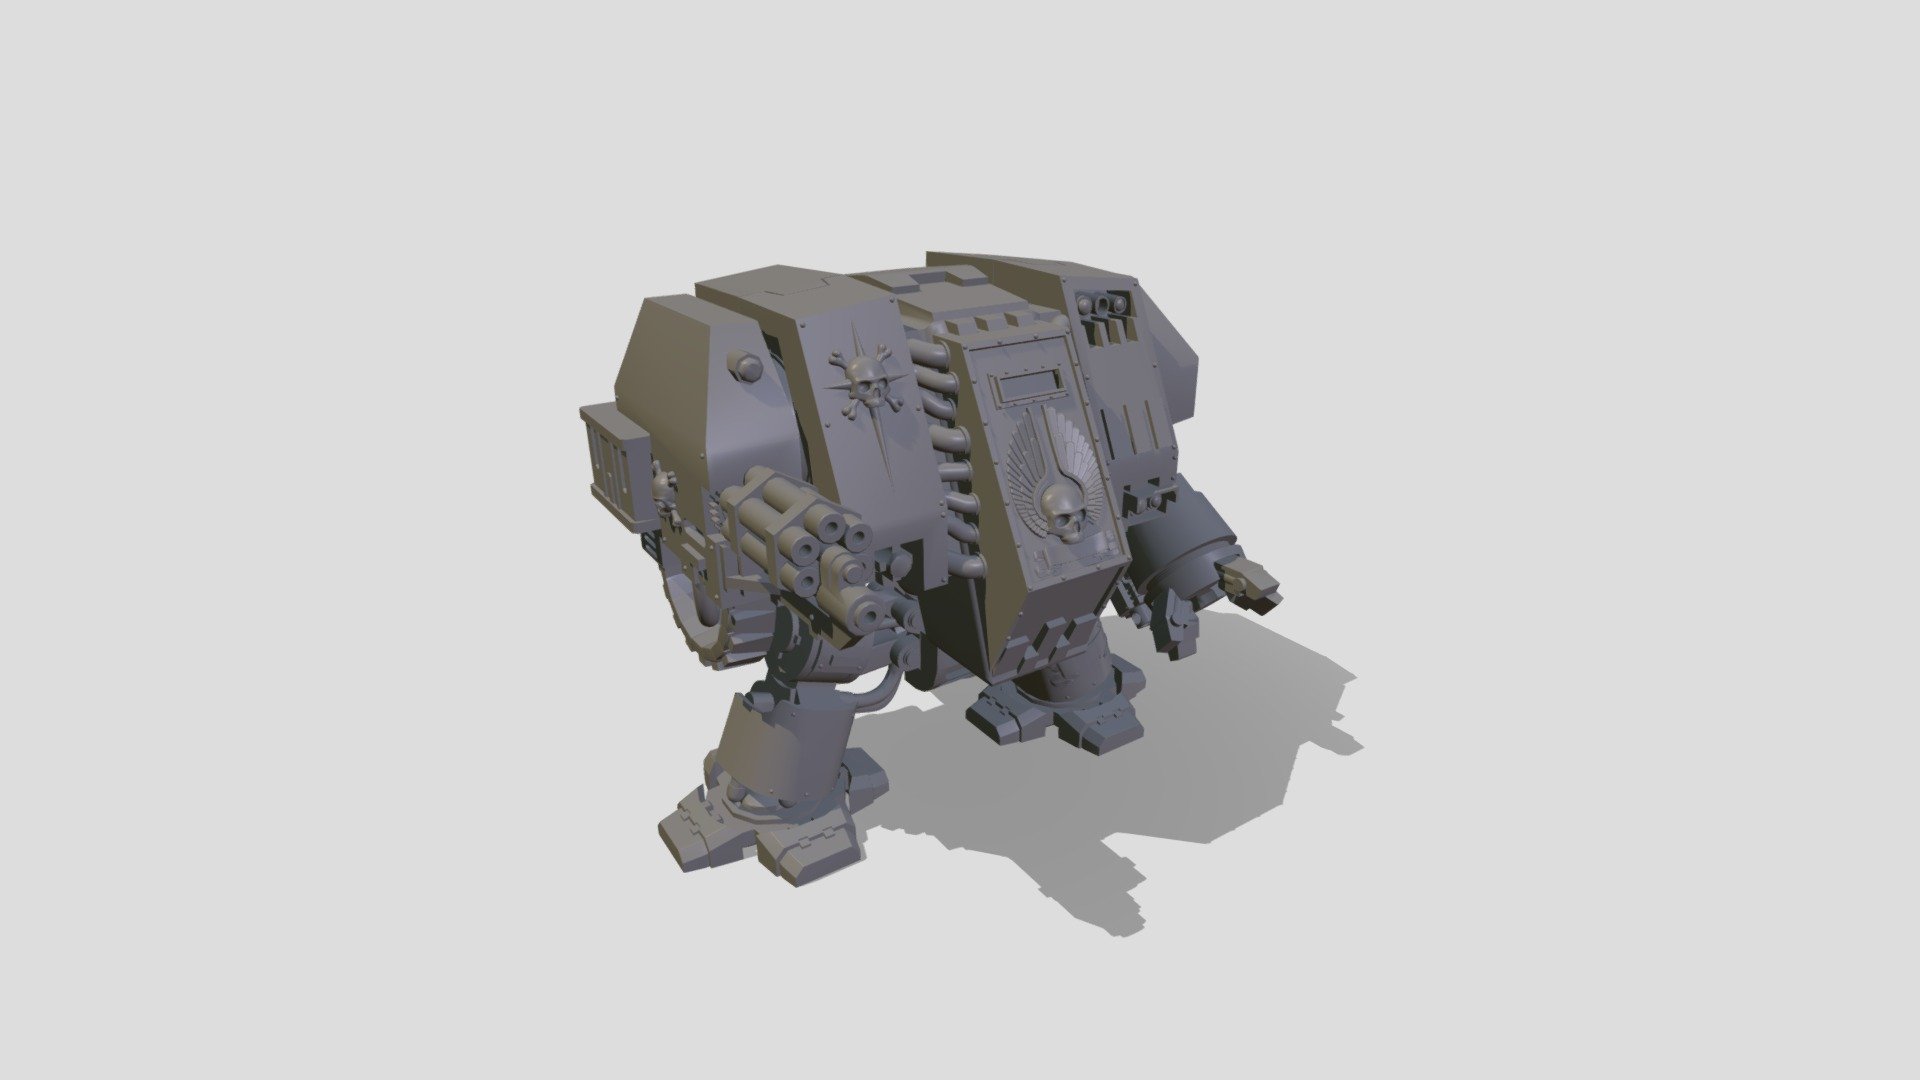 This is an extremely faithful reproduction of Dreadnought miniature from Warhammer 40000 univers.
Modeled with Maxon Cinema 4D 3d model